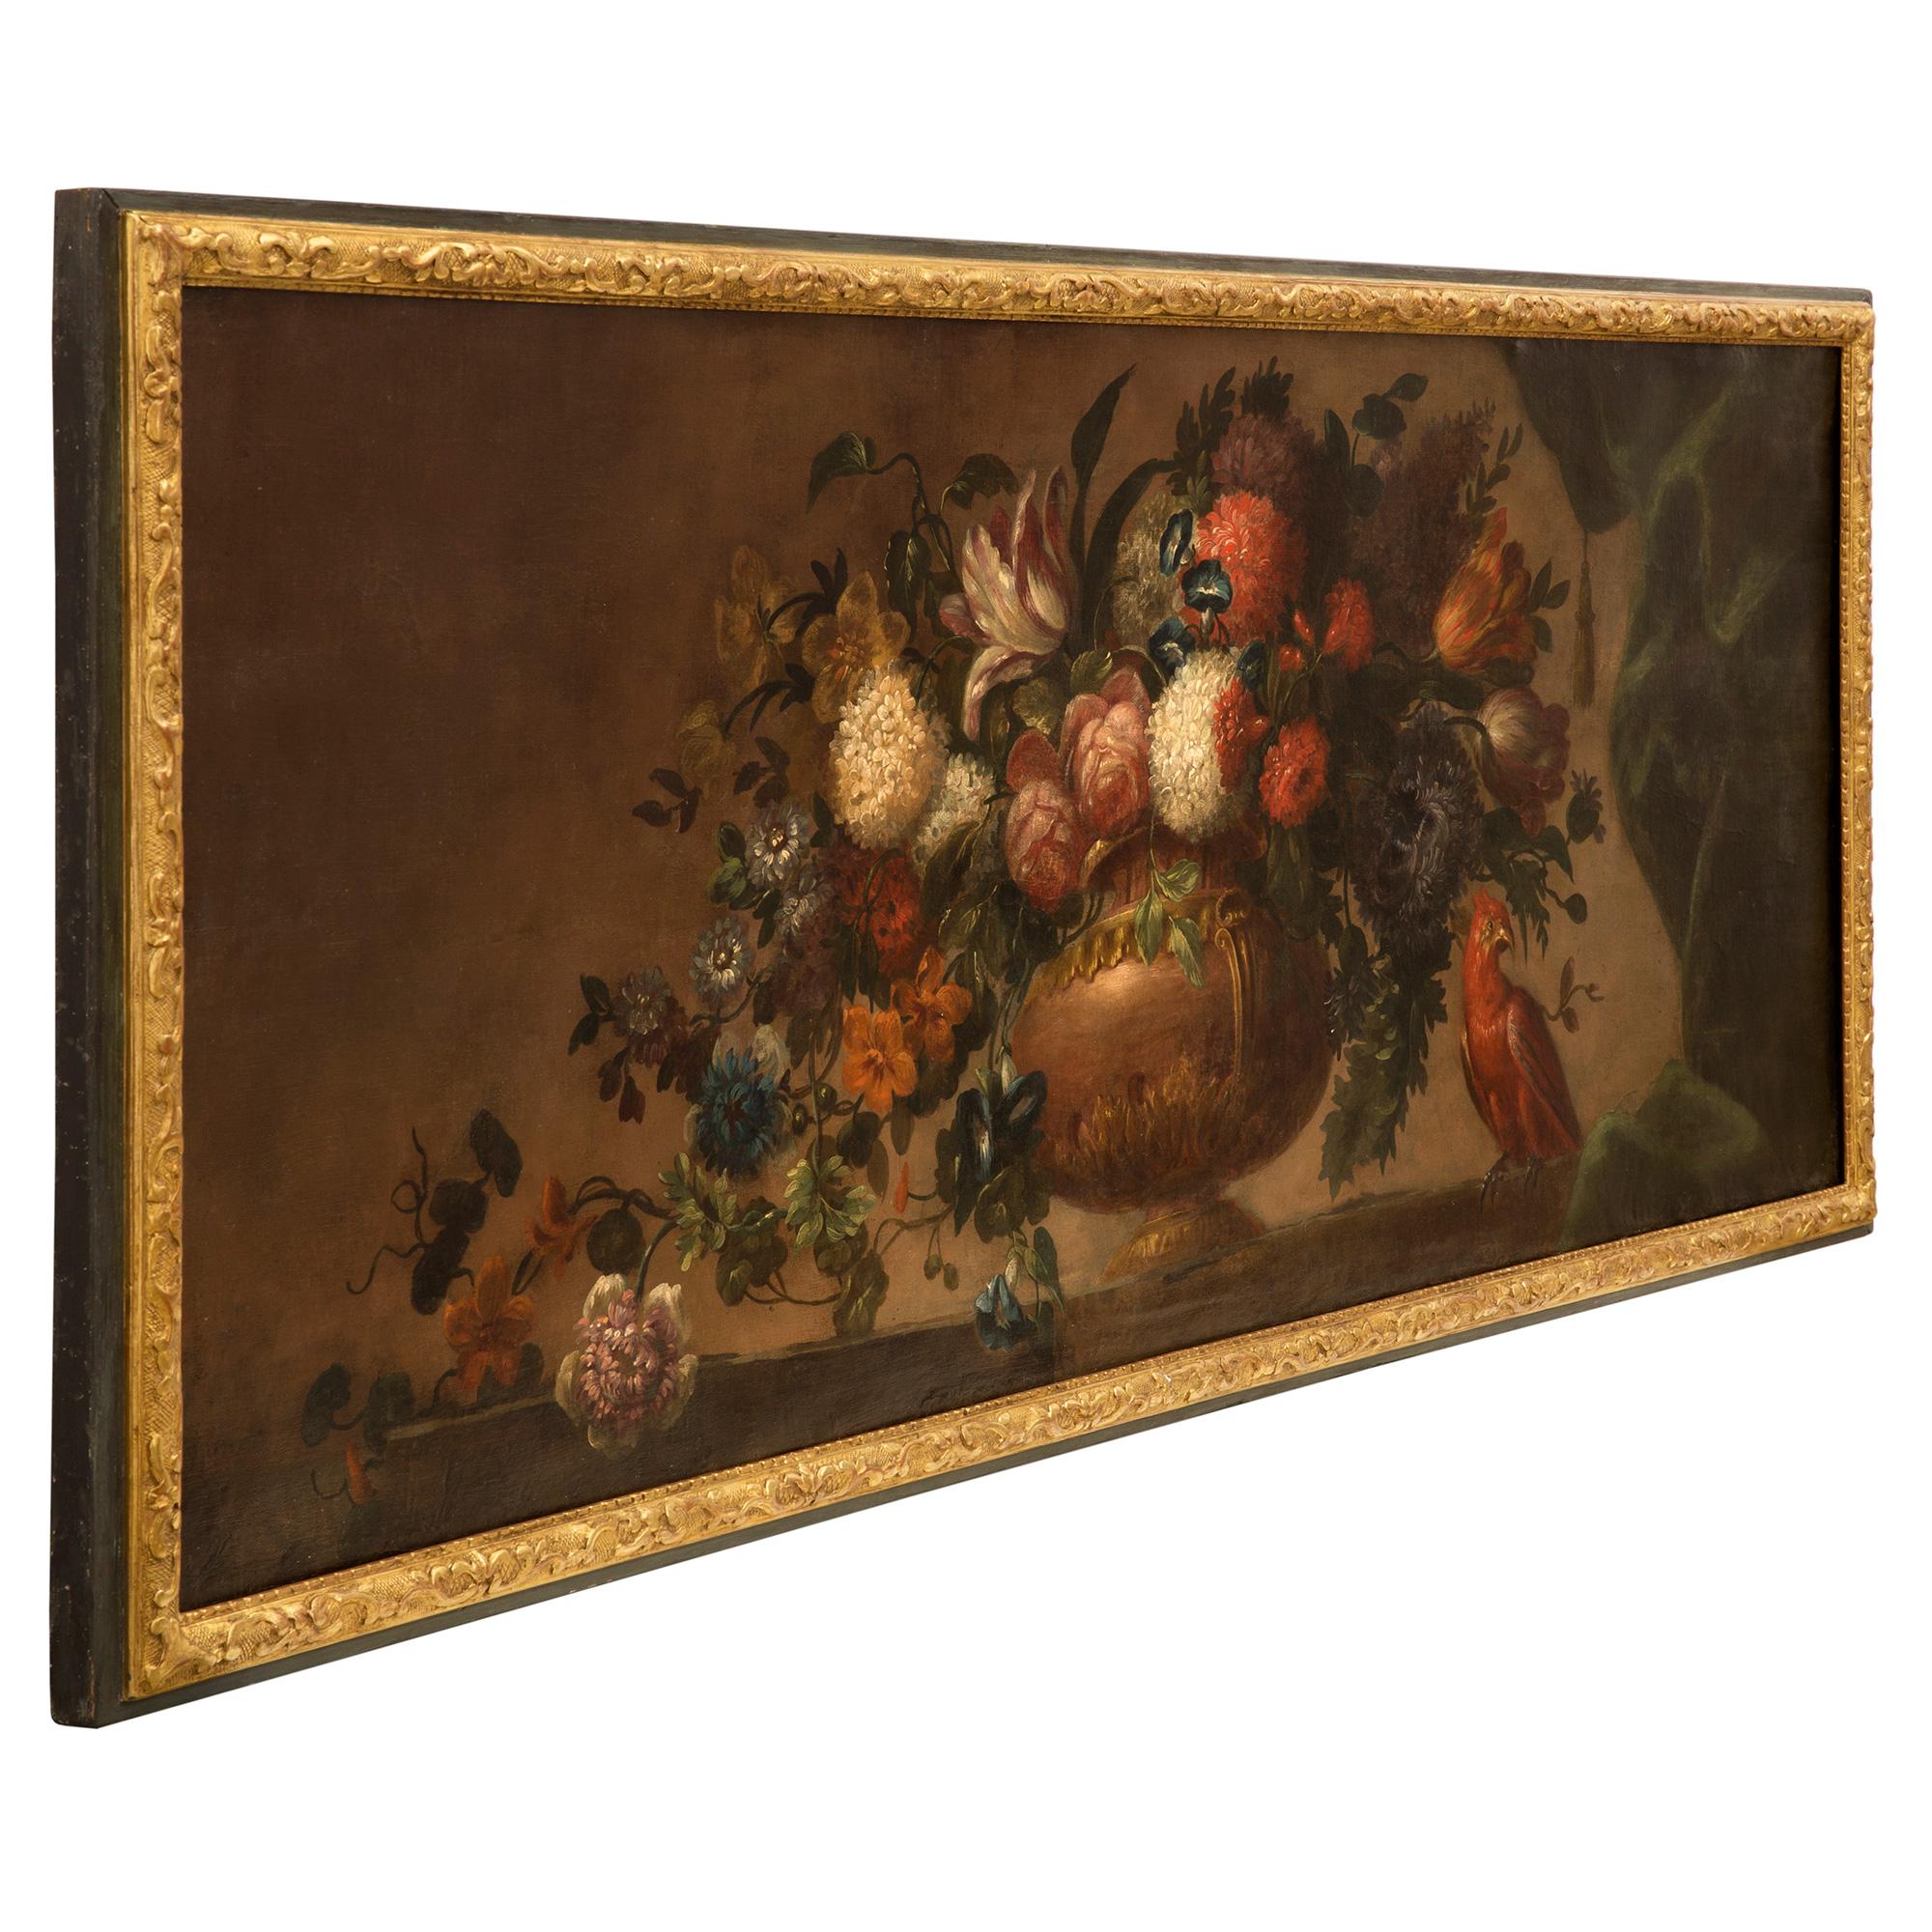 A beautiful French early 19th century Louis XVI st. oil on canvas painting. The still life painting is set within is original patinated green and giltwood frame and depicts an elegant large urn at the center with stunning and richly colored